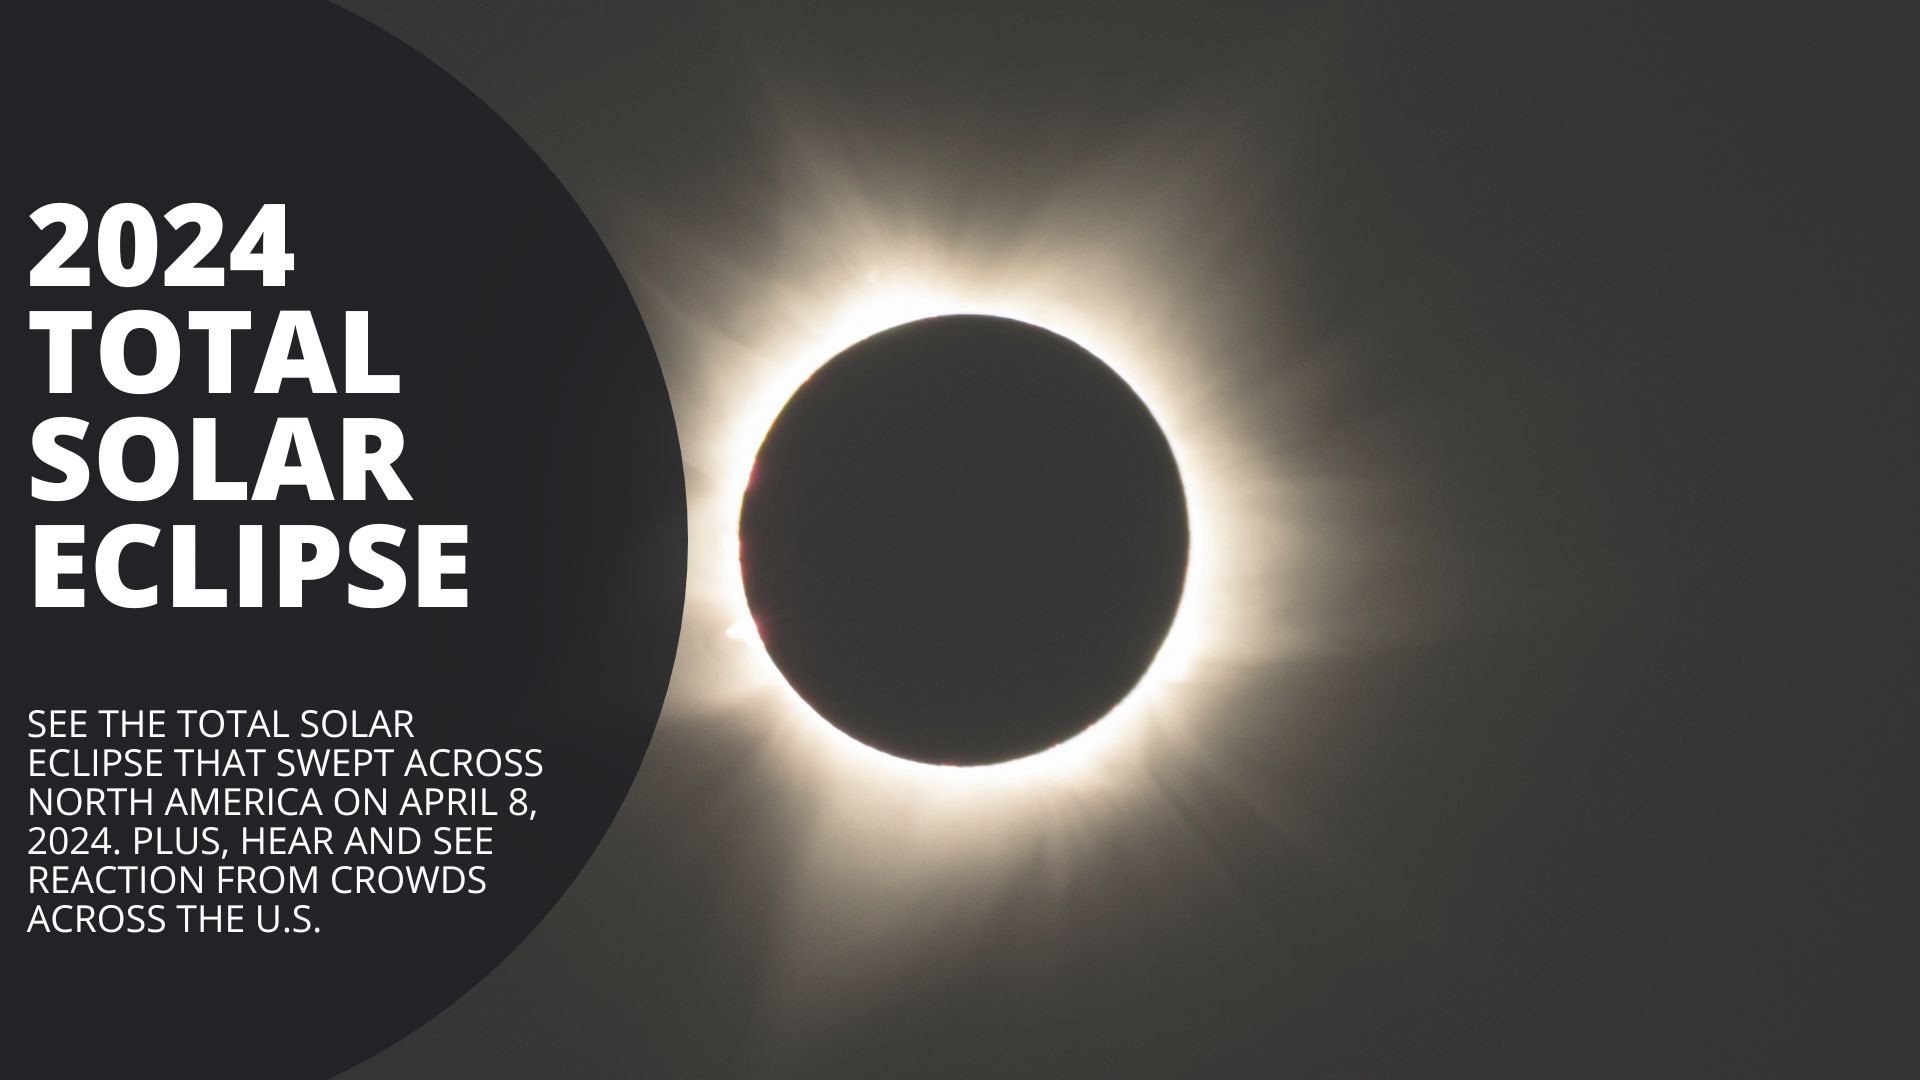 The 2024 total solar eclipse swept across the U.S. on April 8, 2024. Hear and see reaction from crowds as well as see different views of the eclipse.